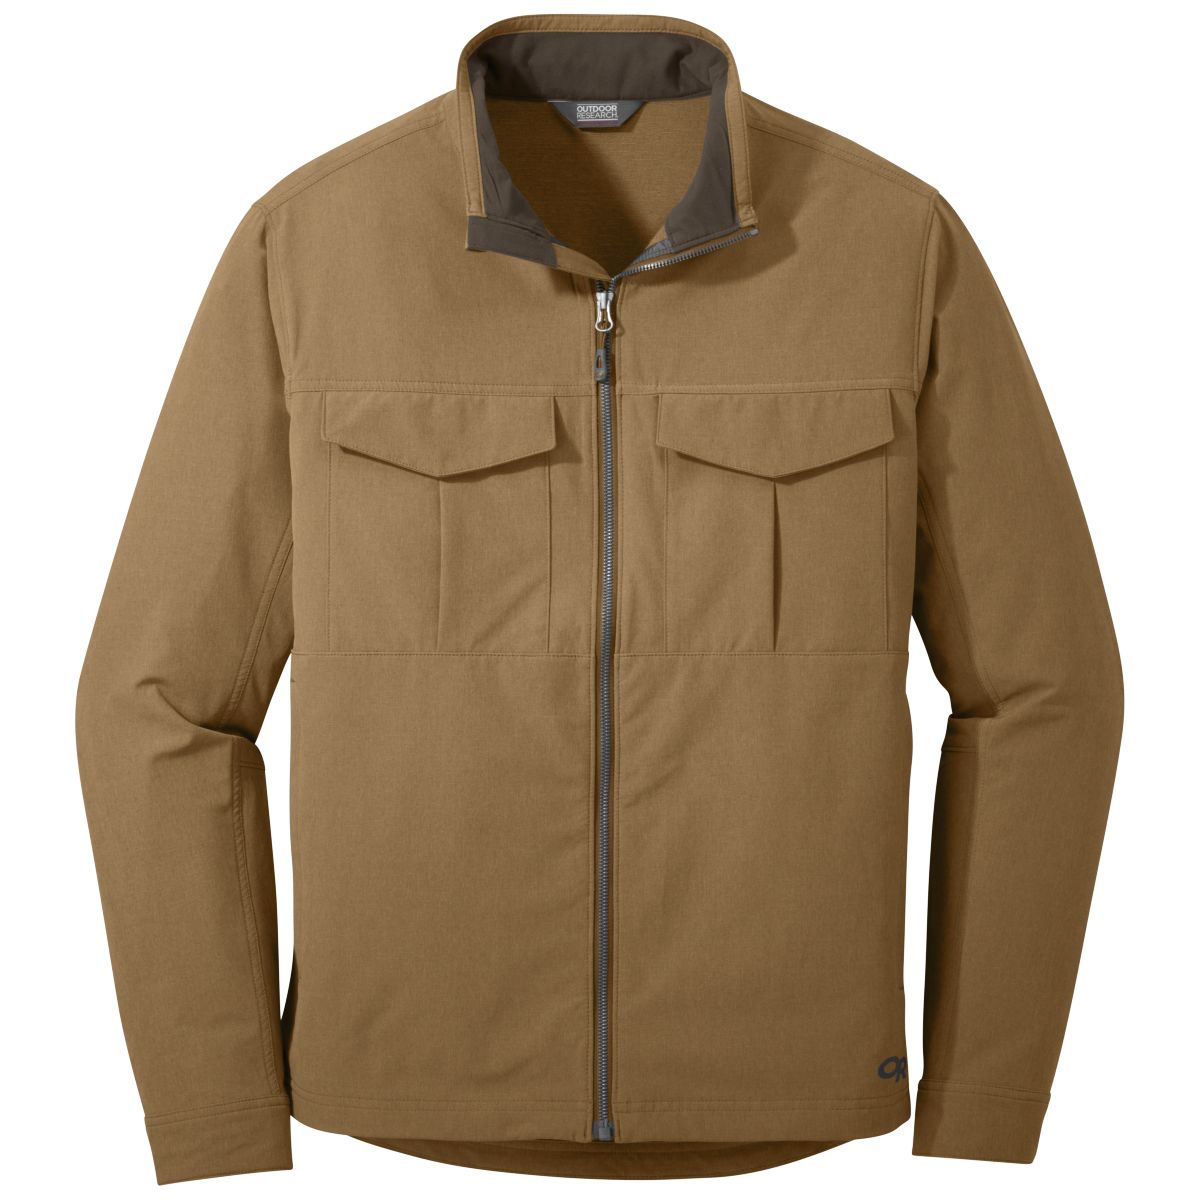 Outdoor Research Prologue Field Jacket - Men's (Fall 2019) - Saddle Heather